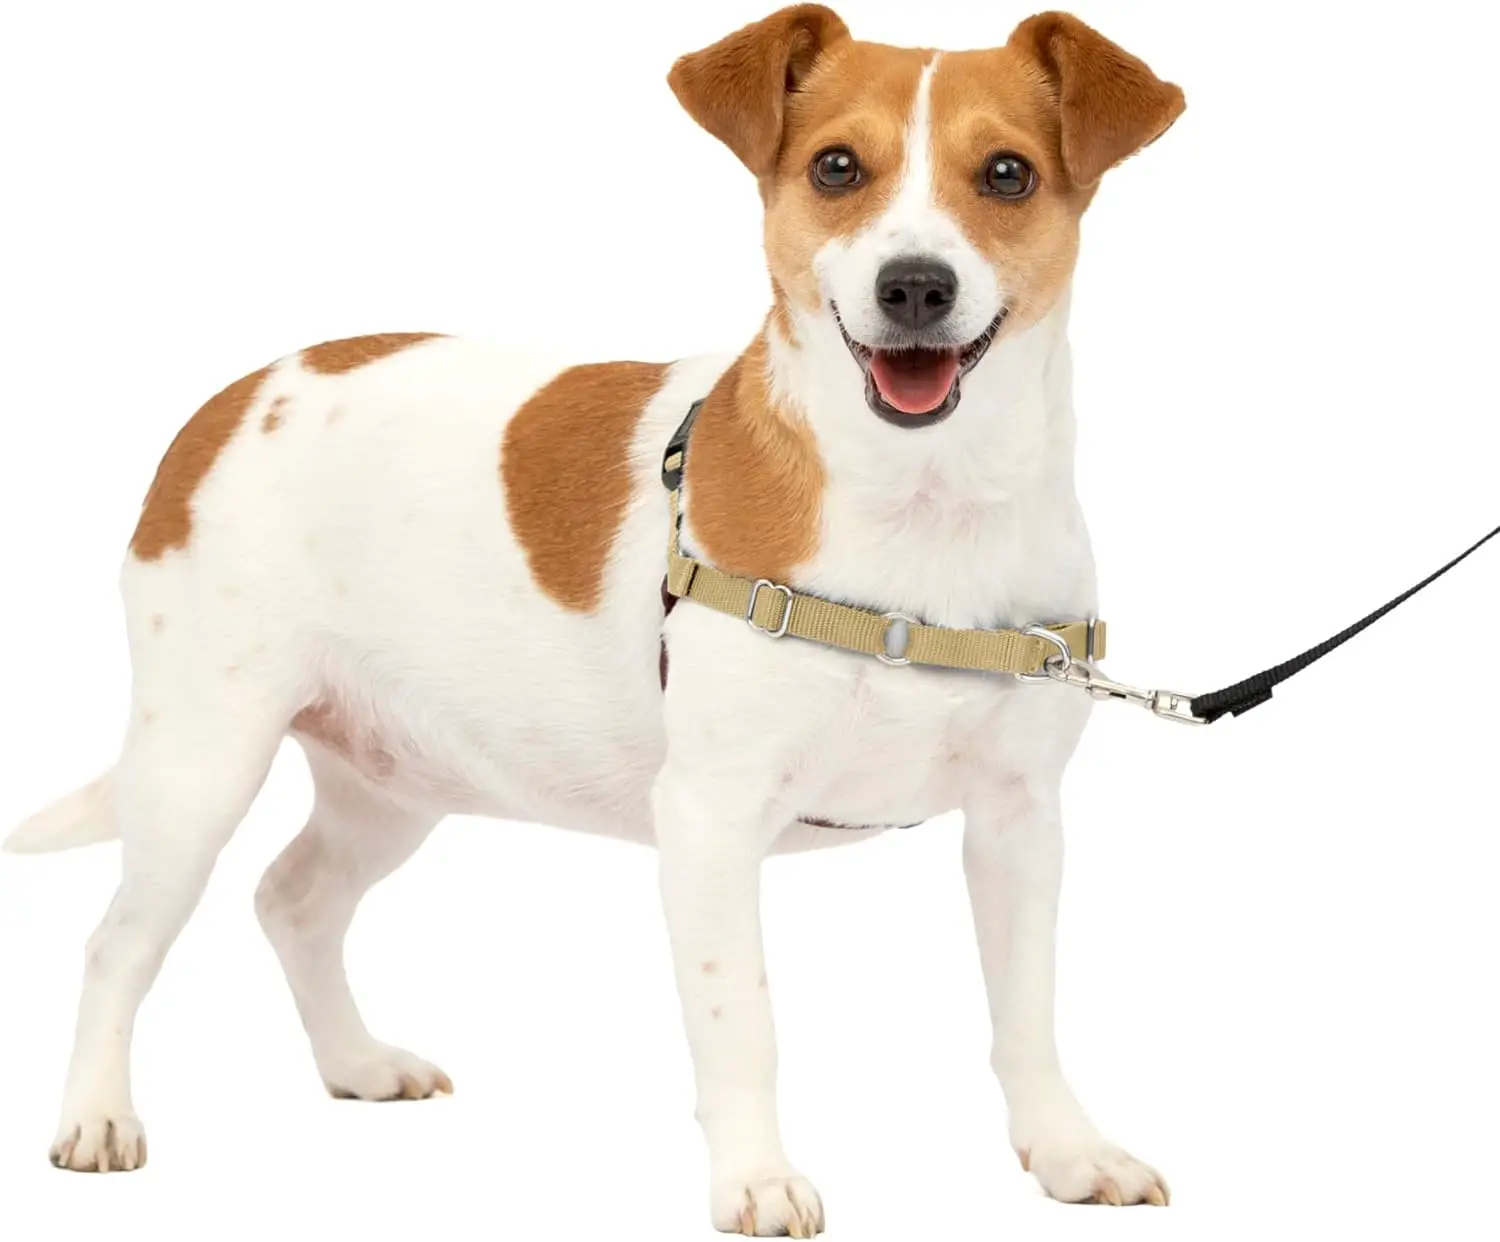 PetSafe Easy Walk Harness, Small, Brown for Dogs